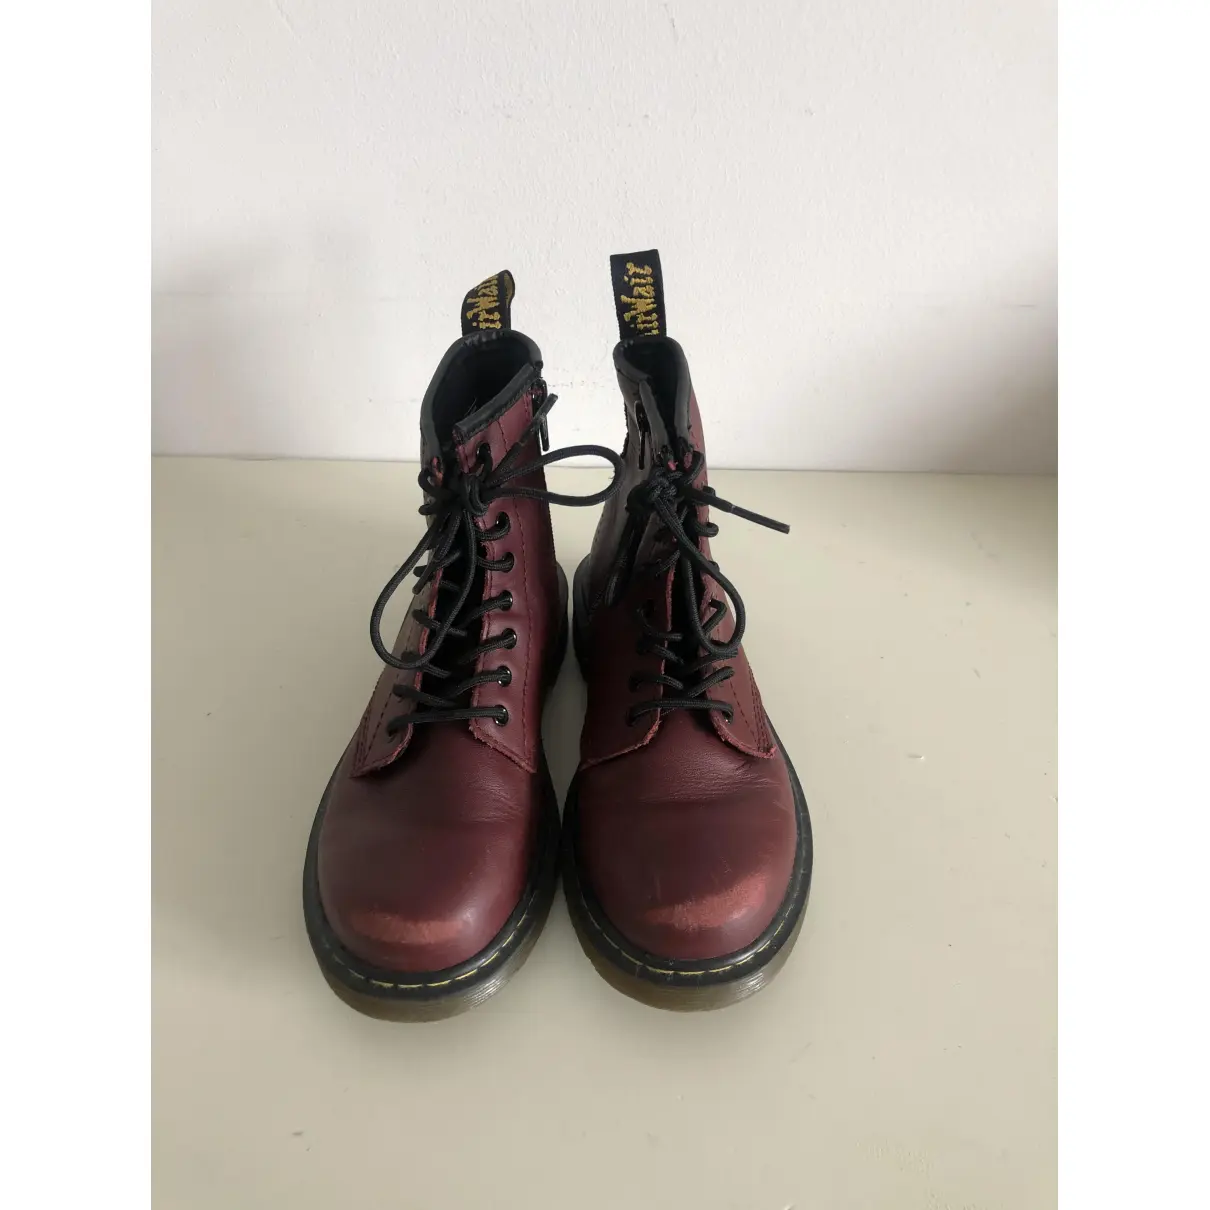 Buy Dr. Martens Leather boots online